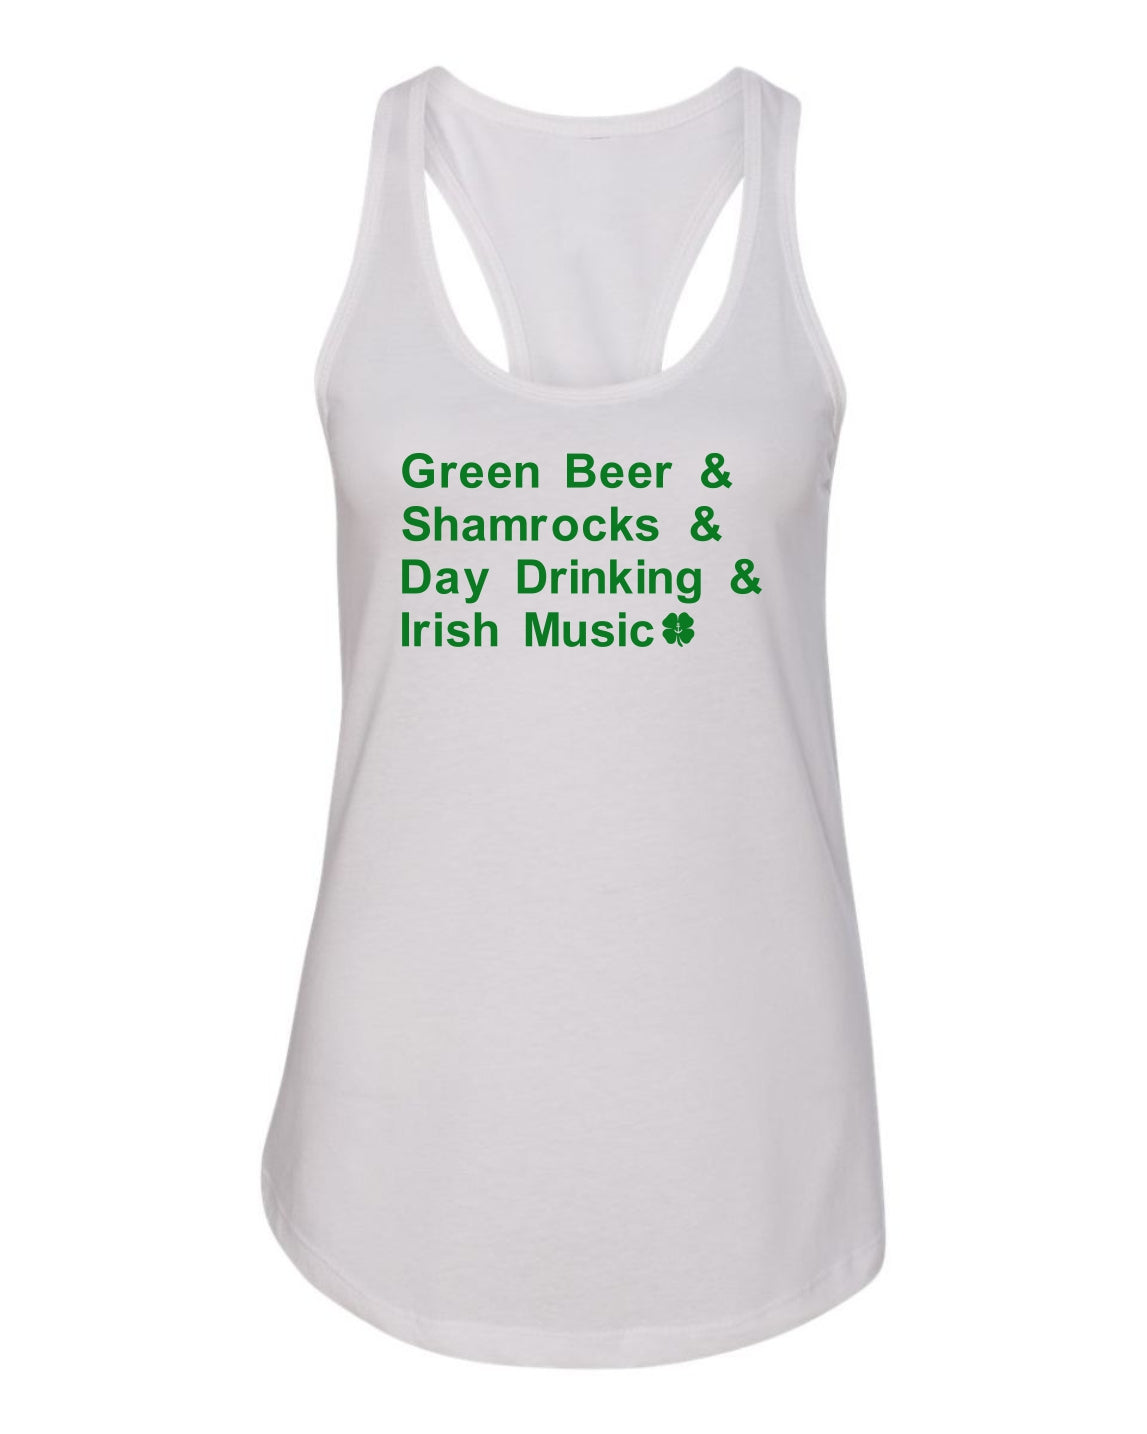 Paddy's Day Essentials Ladies' Tank Top